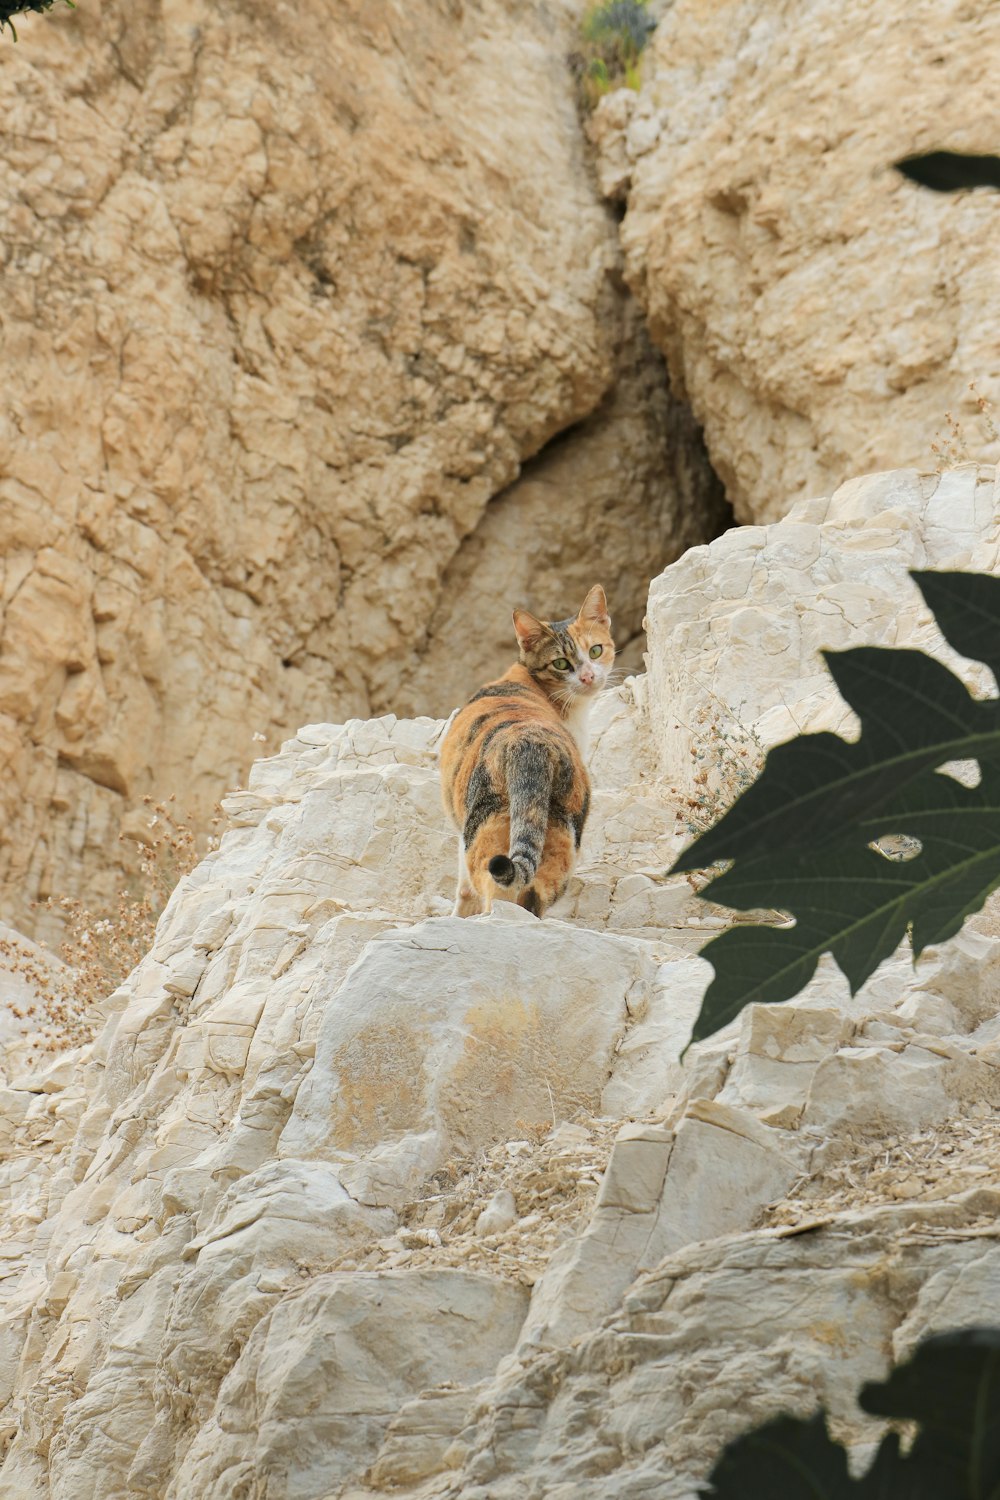 a cat standing on top of a large rock